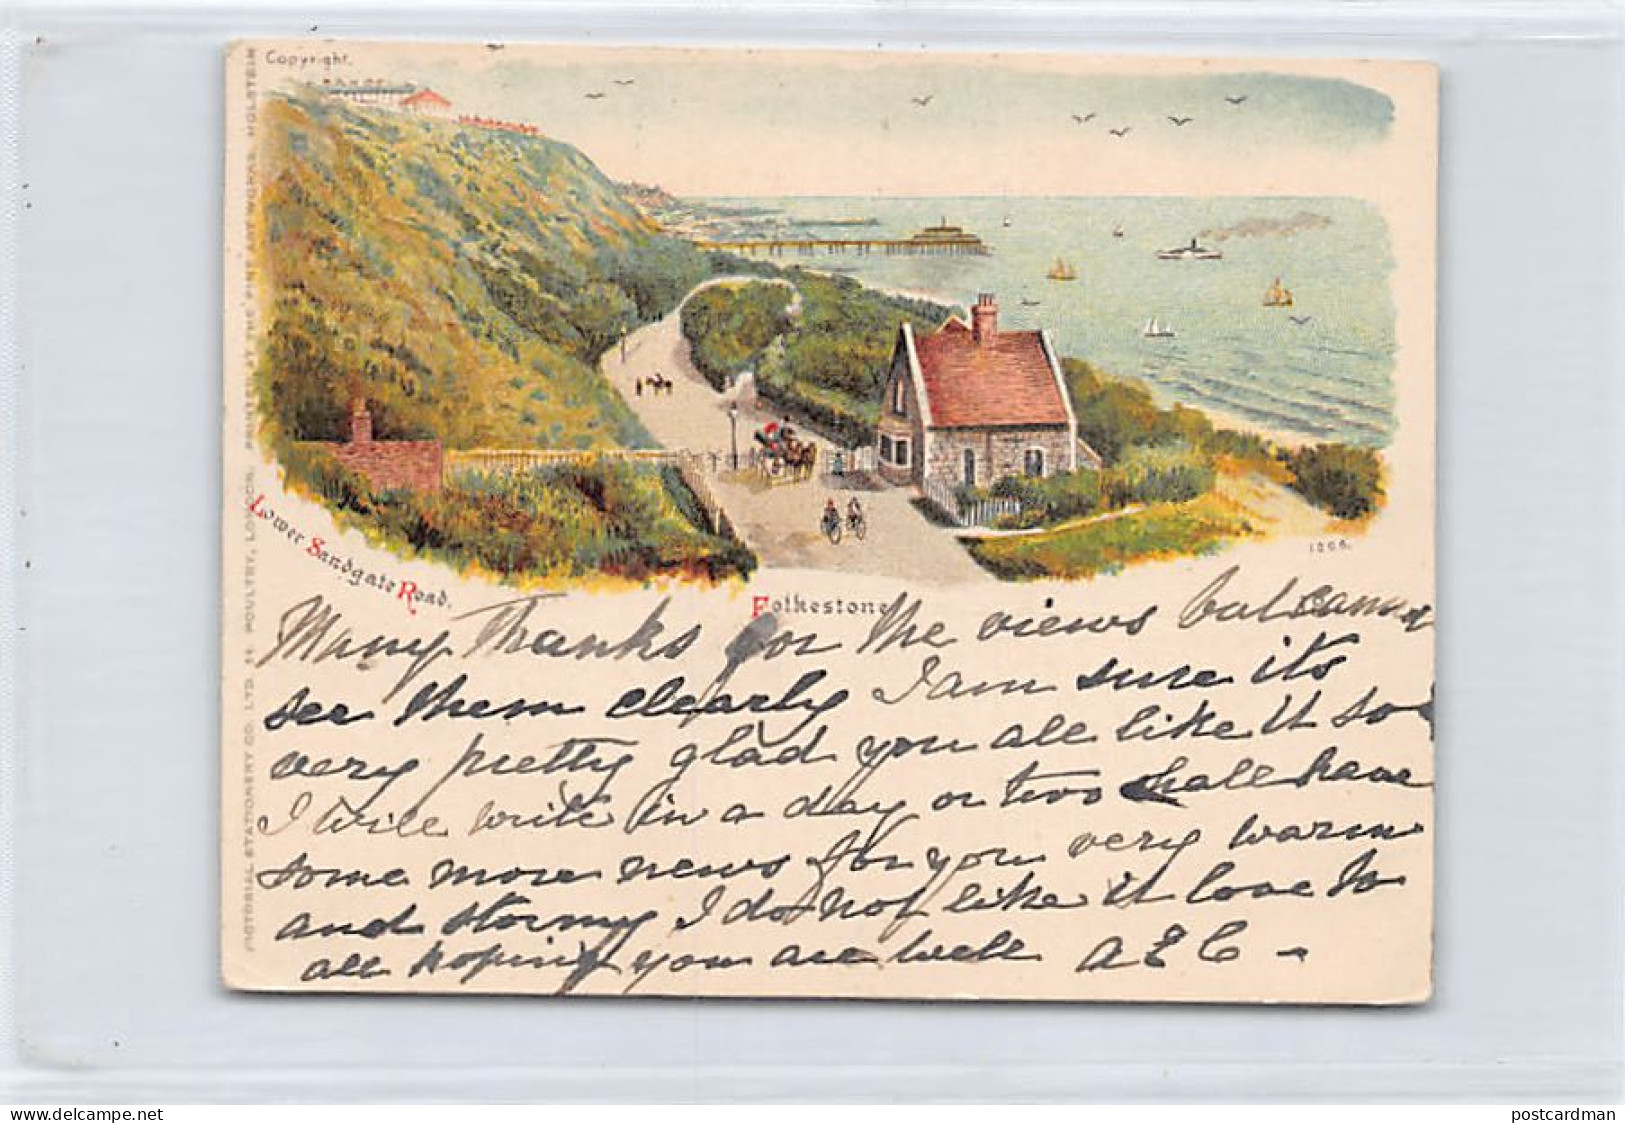 England - FOLKESTONE (Kent) Lower Sandgate Road - LITHO - FORERUNNER POSTCARD Small Size - Publ. Pictorial Staionery Co. - Folkestone